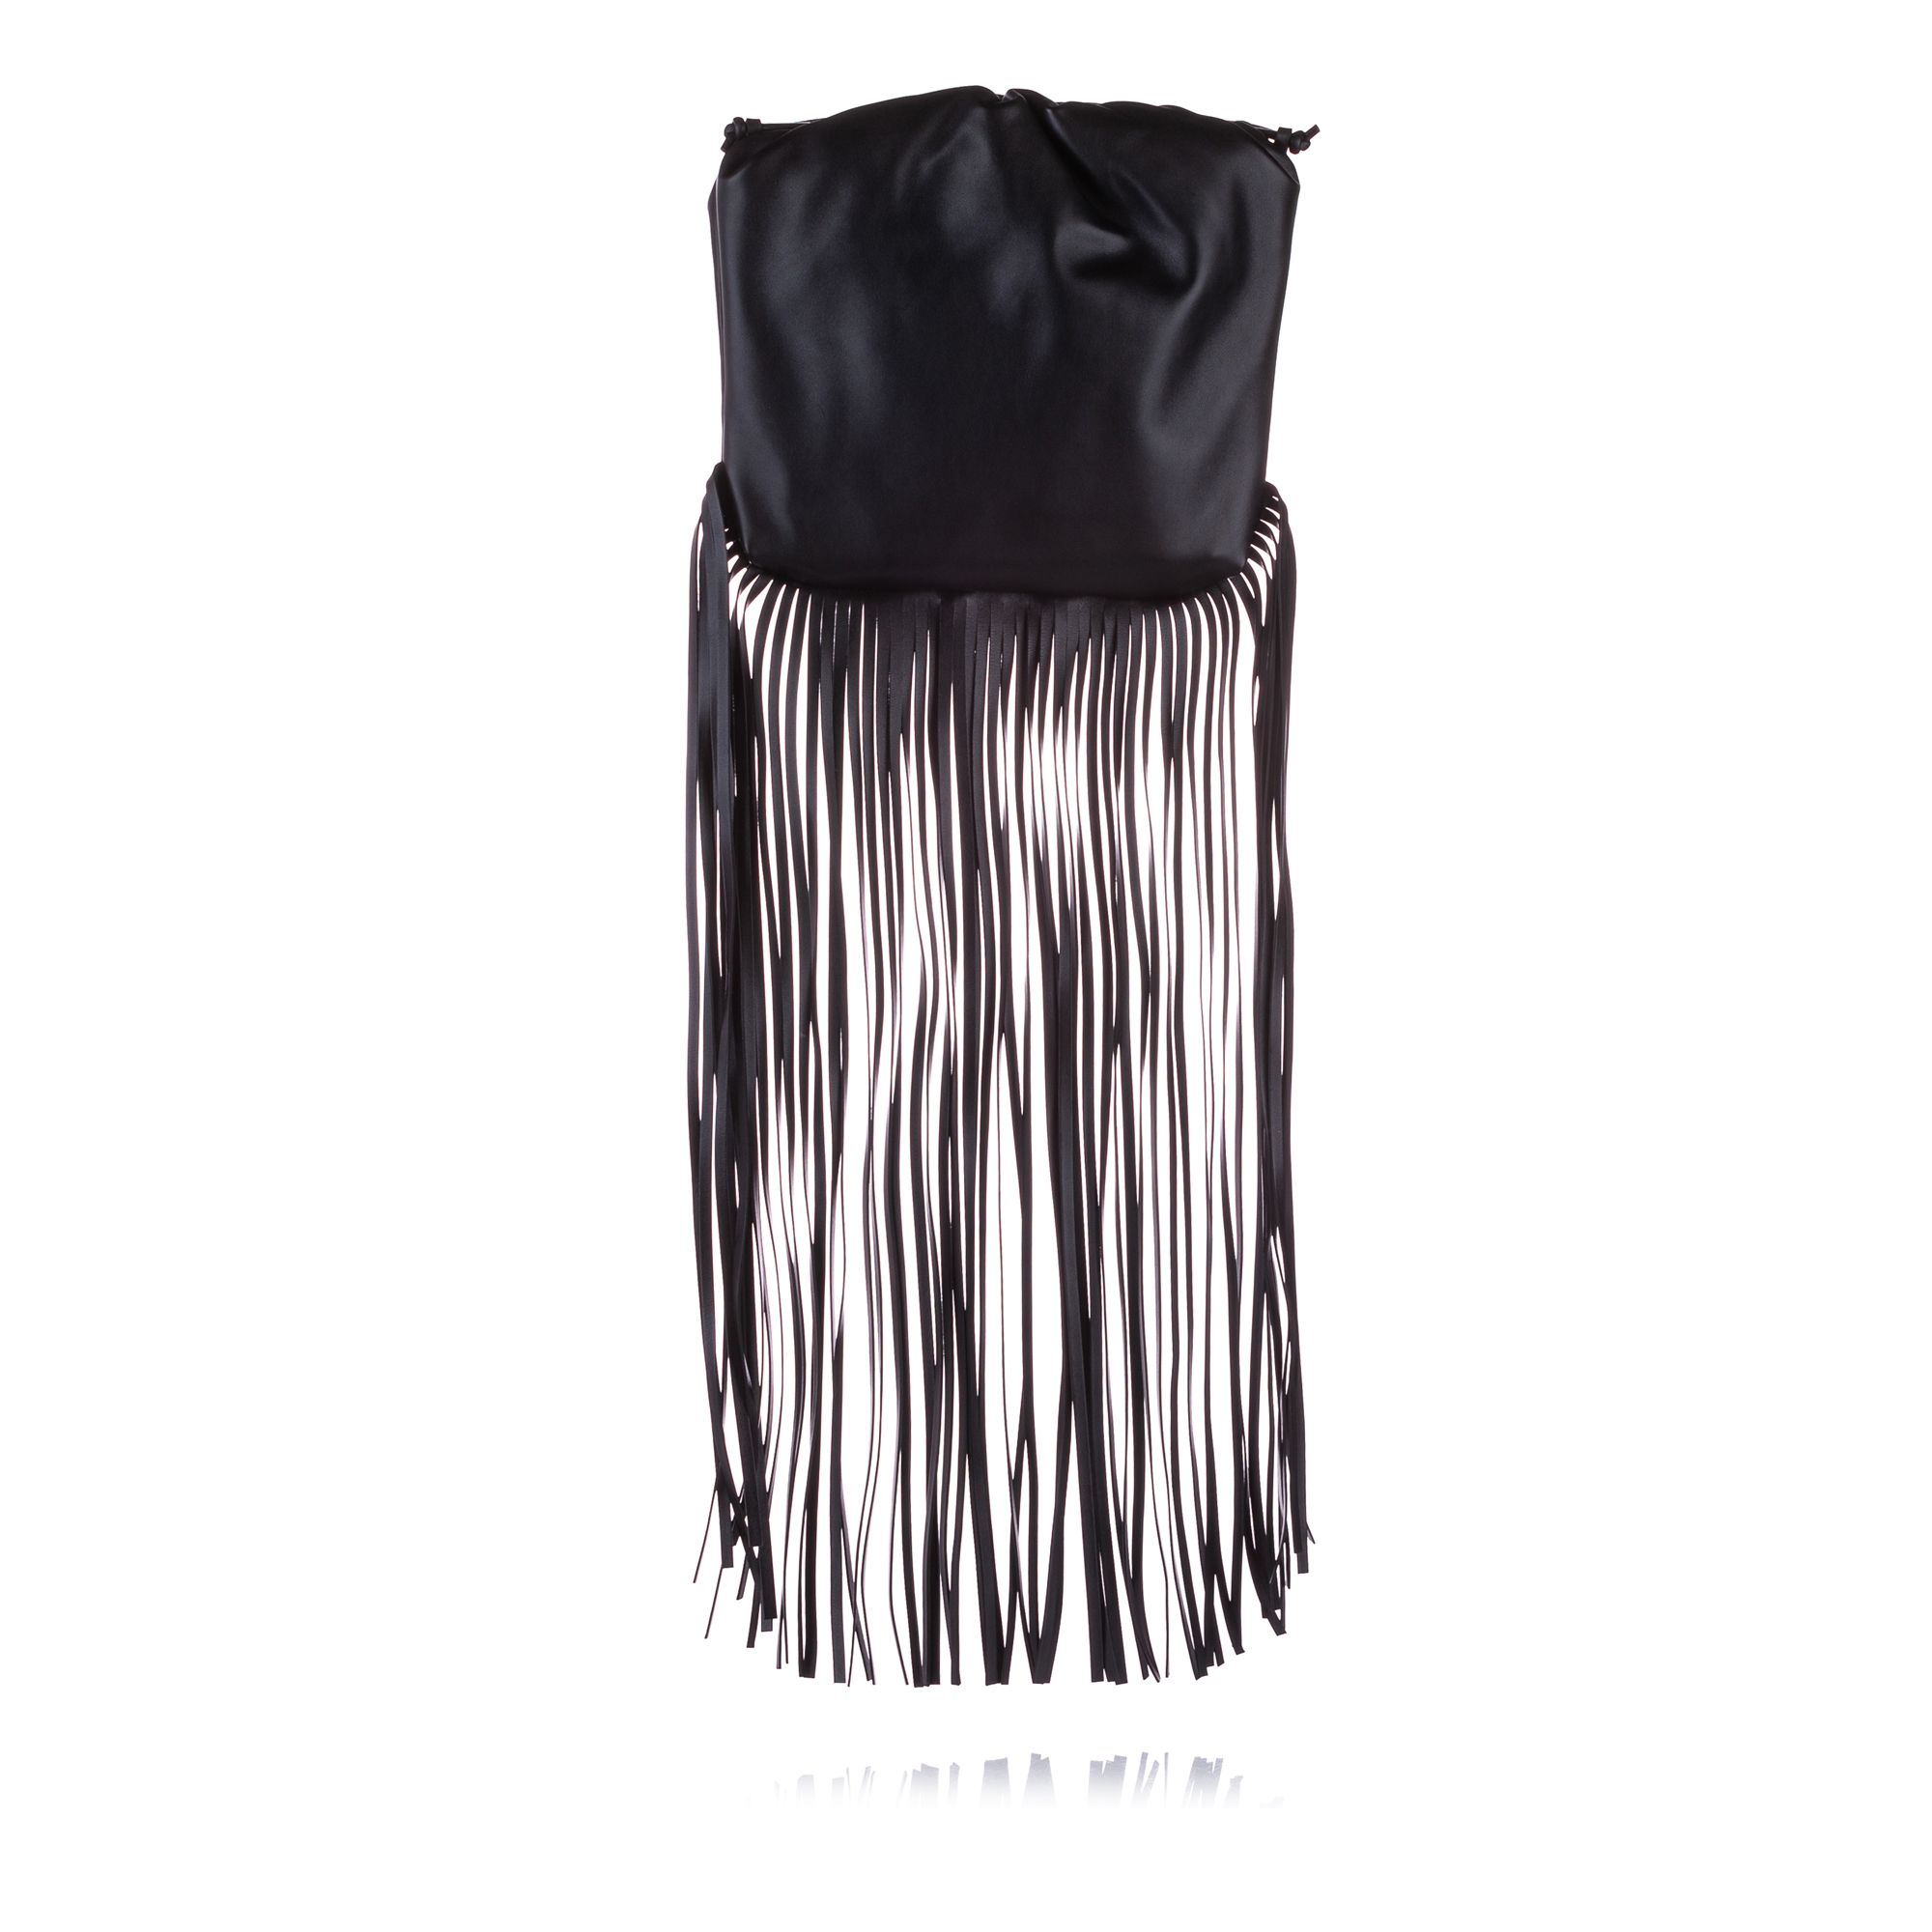 VINTAGE. RRP AS NEW. The Fringe Pouch features a leather body with fringe detail, rolled leather straps, an open top with a snap closure and interior zip and slip pockets.
Dimensions:
Length 28cm
Width 28cm
Depth 4cm
Shoulder Drop 21cm

Original Accessories: Dust Bag

Serial Number: BO9007883L
Color: Black
Material: Leather x Calf
Country of Origin: ITALY
Boutique Reference: SSU81483K1342


Product Rating: VeryGoodCondition